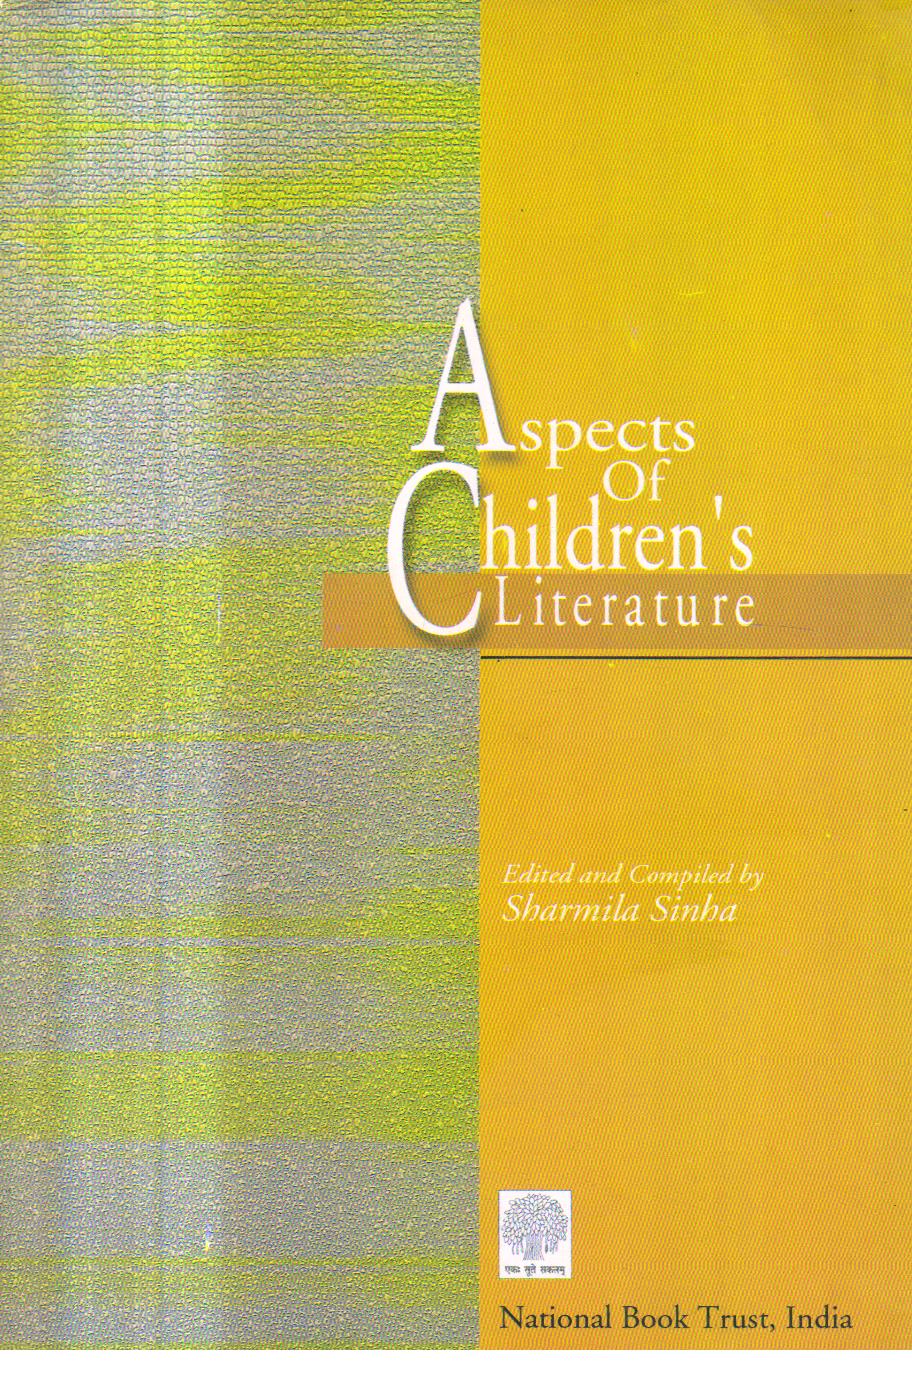 Aspects of Childrens Literature